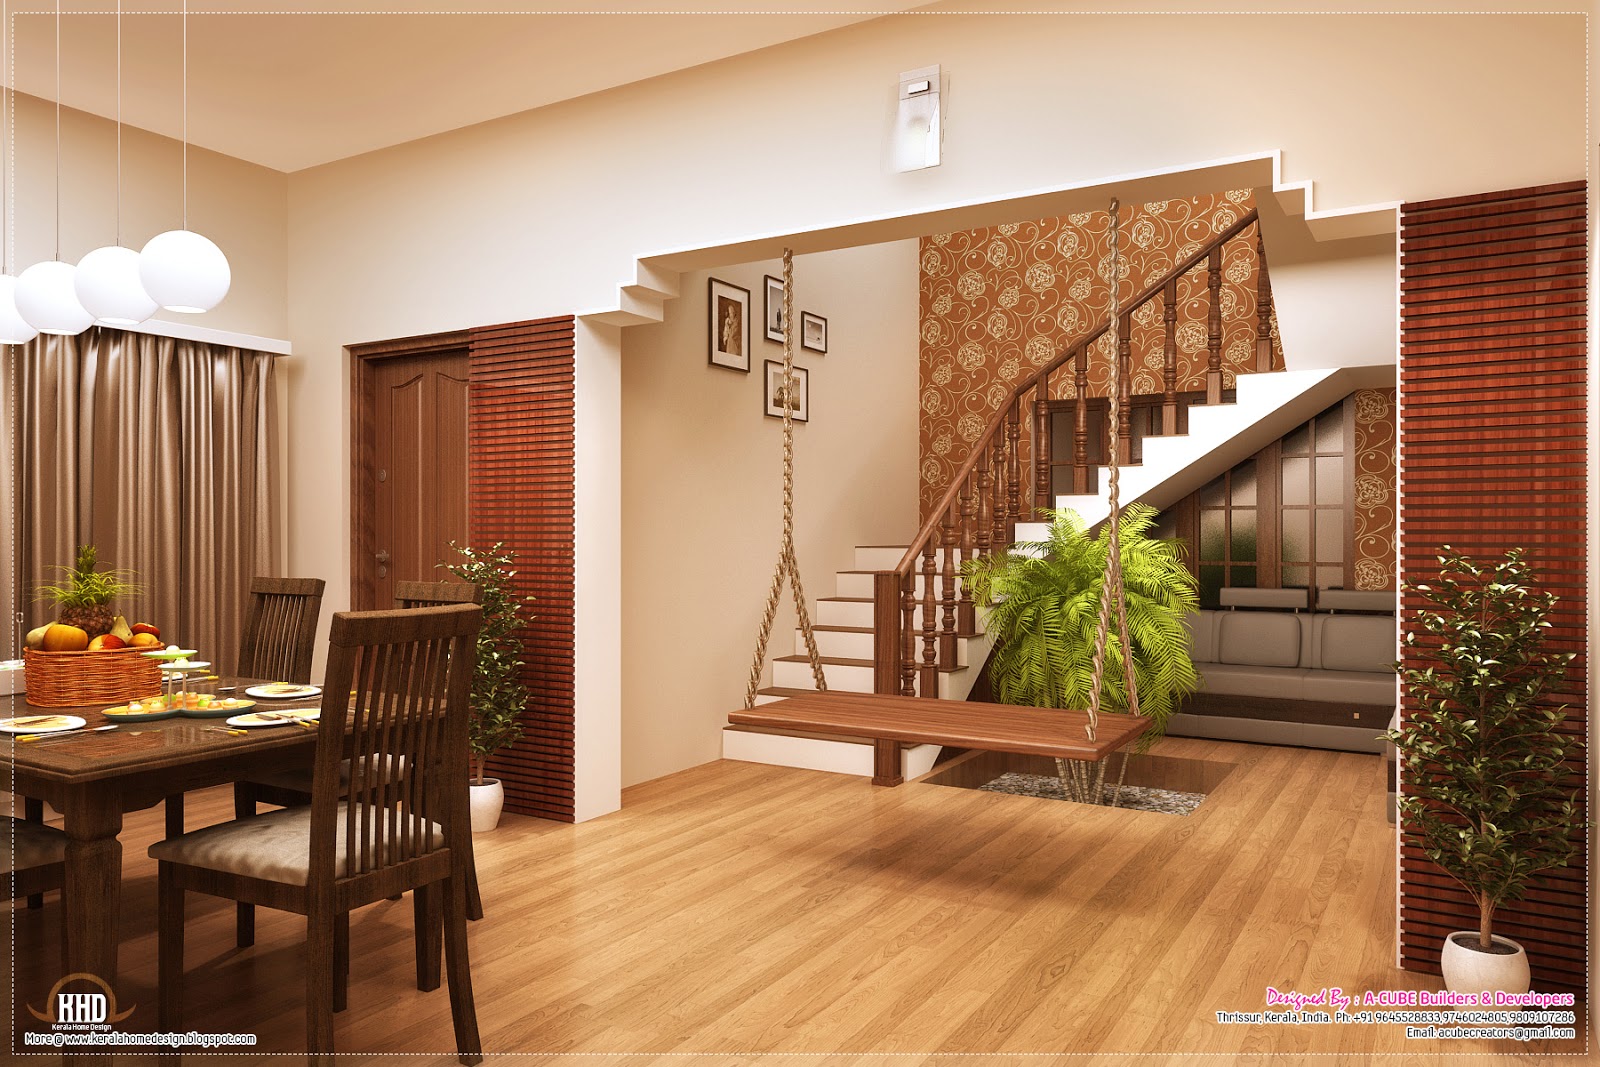 Awesome interior decoration ideas  Kerala home design and 